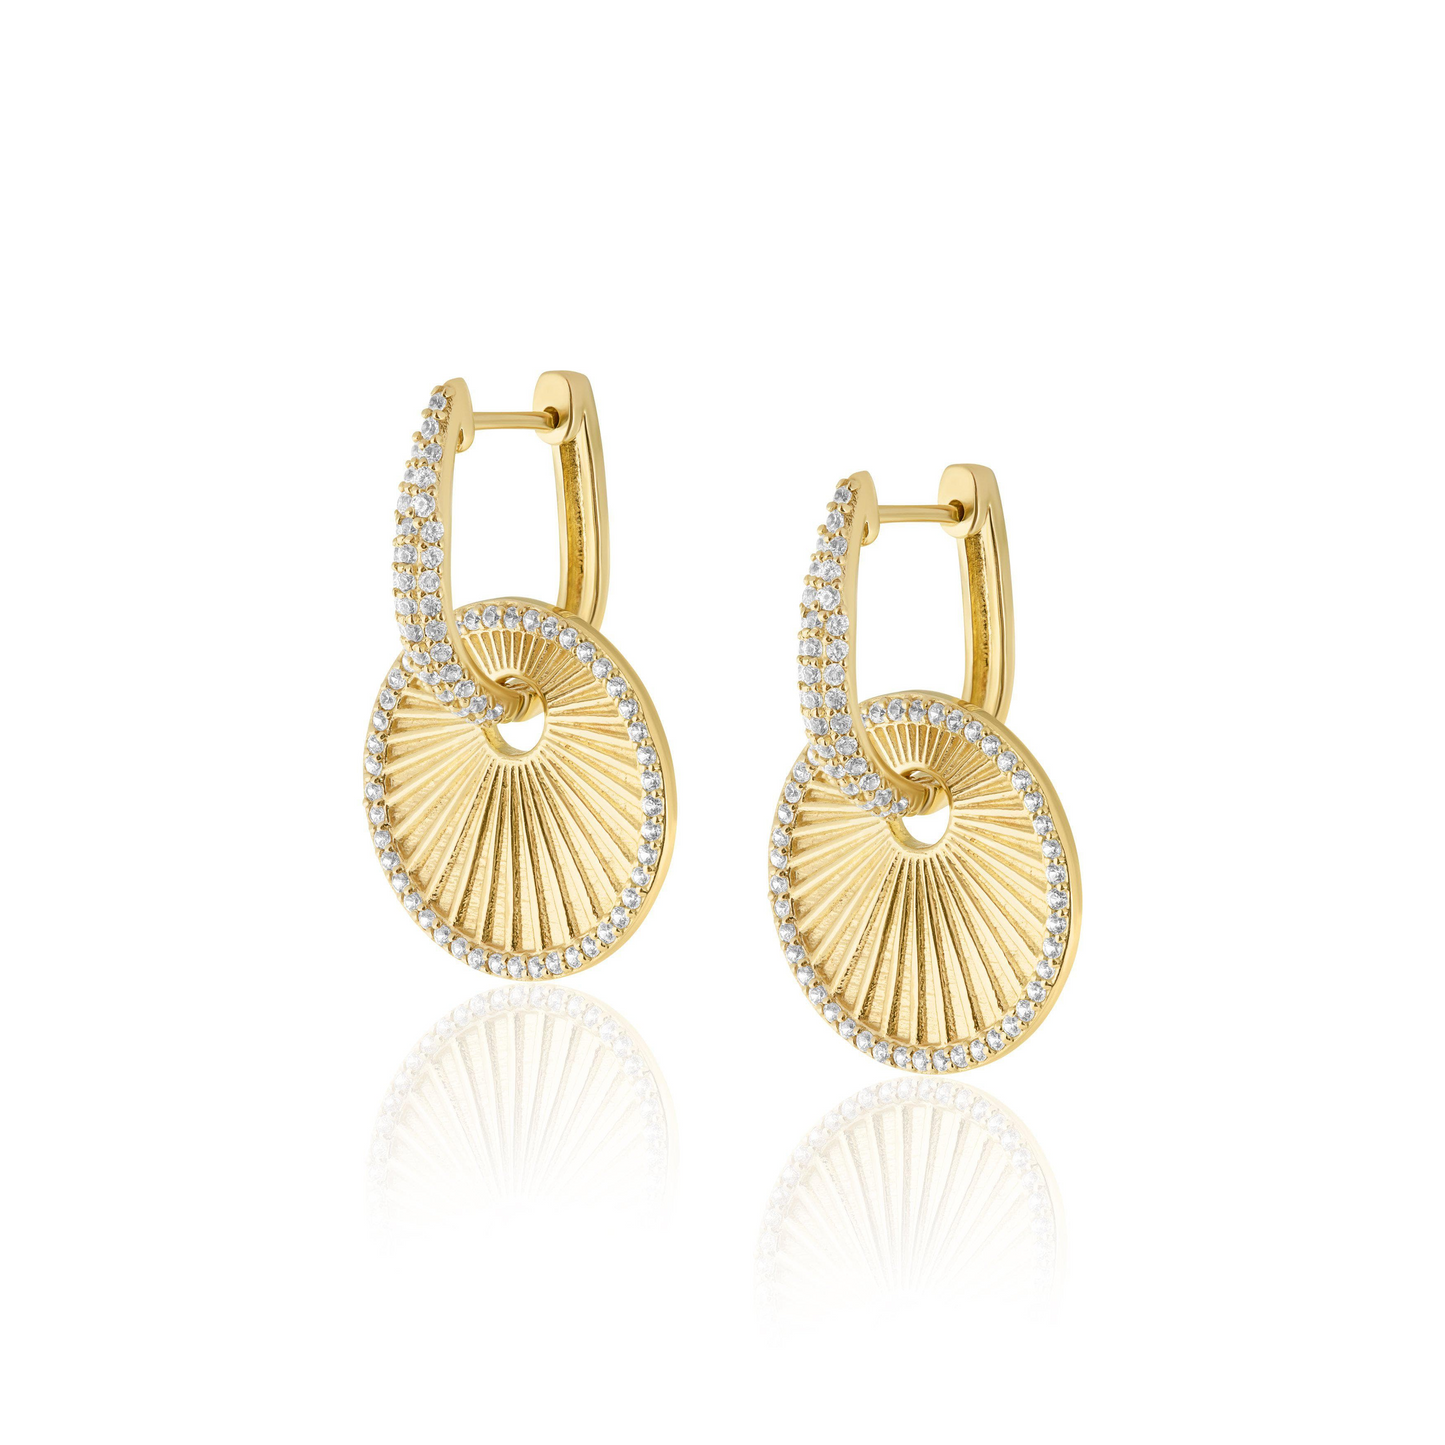 Claw Huggies & Pave Disc Earrings